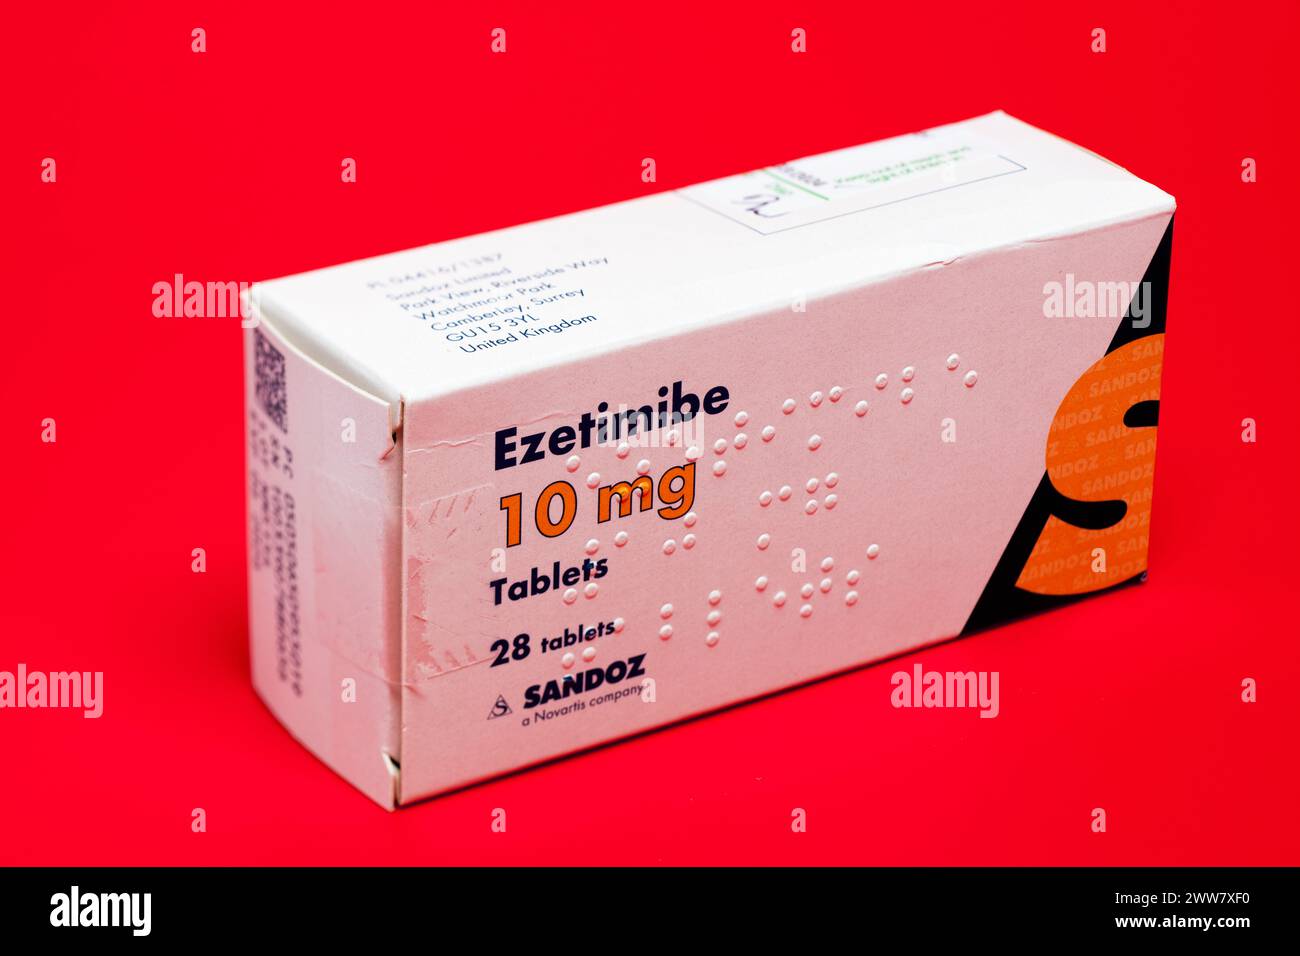 Box of 28  Ezetimibe 10mg Tablets on a Red Background Stock Photo